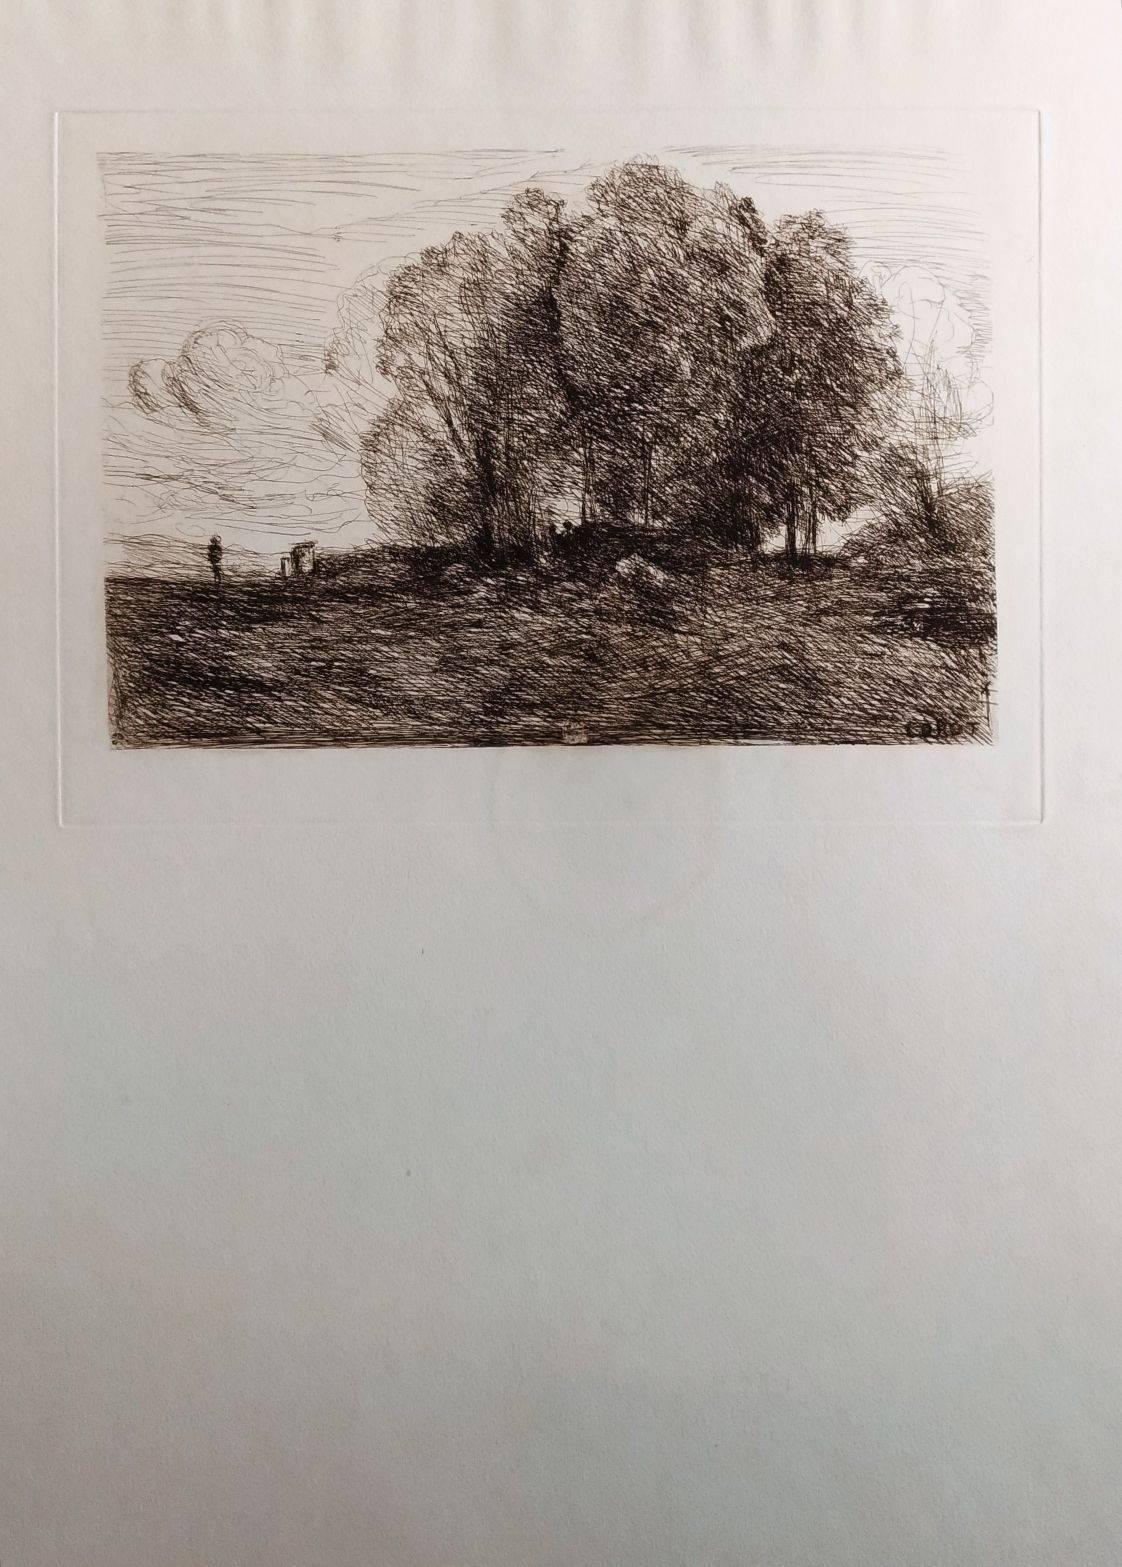 Landscape #4 - Original Etching by Camille Corot - 1850 - Print by Jean-Baptiste-Camille Corot